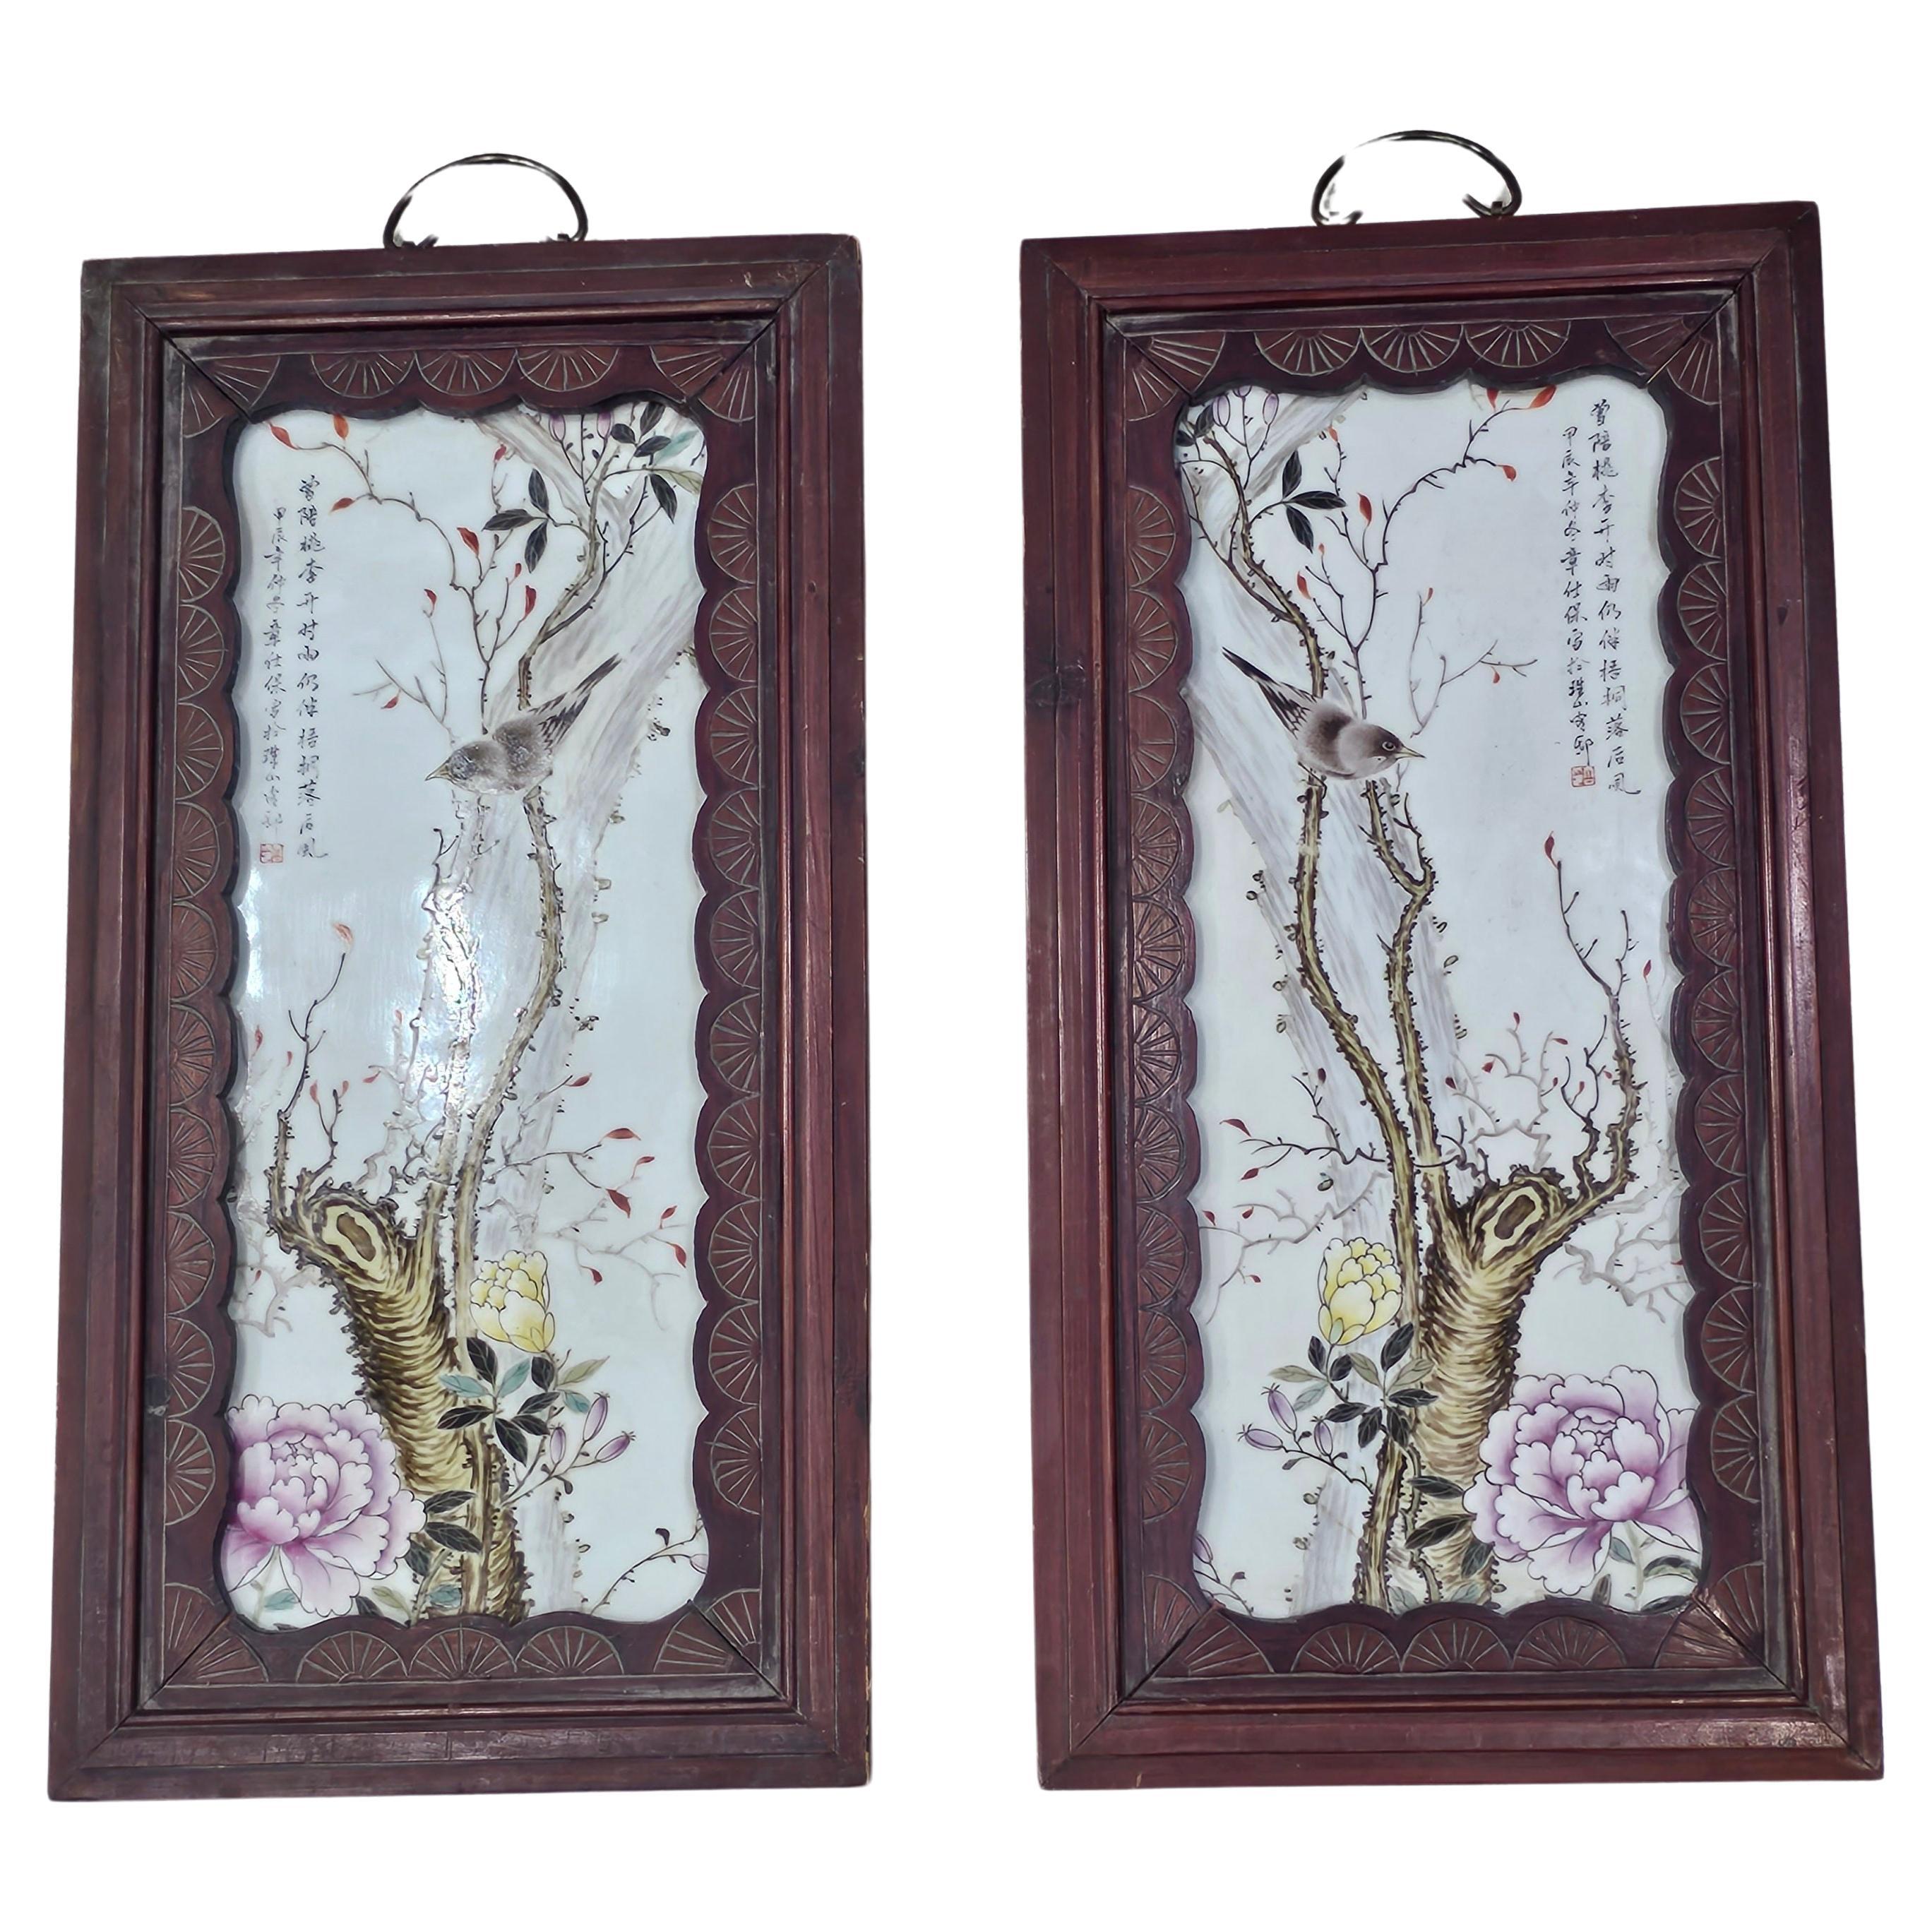 A are pair of 19th Century  Chinese Famille Rose Porcelain Plaques in Carved Wood Frames.
Measures 12.5